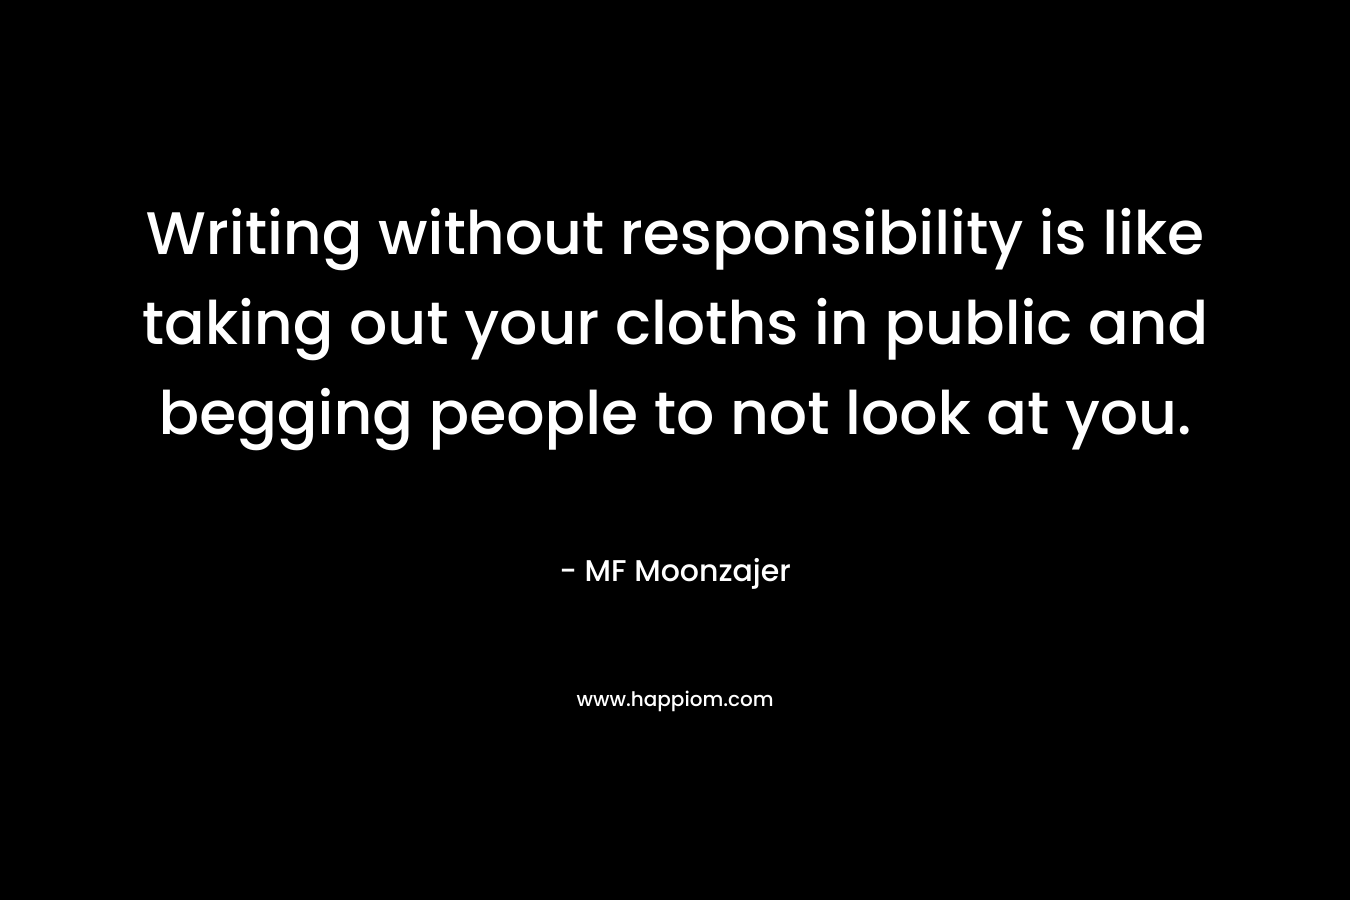 Writing without responsibility is like taking out your cloths in public and begging people to not look at you. – MF Moonzajer